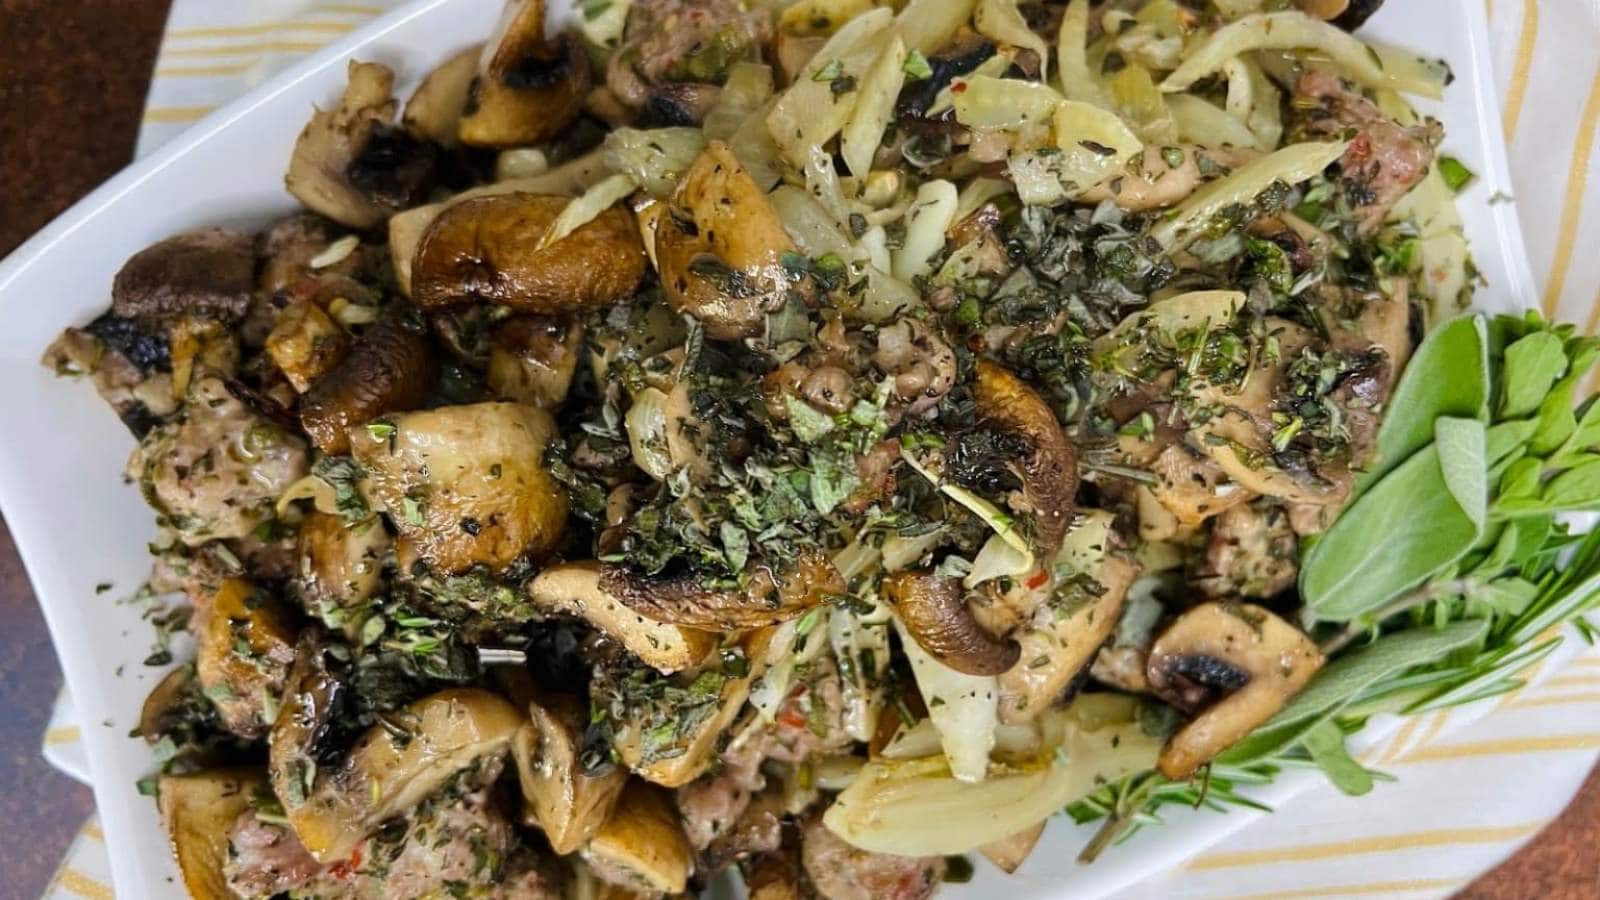 Sheet Pan Sausage with Mushrooms and Fennel recipe by Mangia with Michelle.